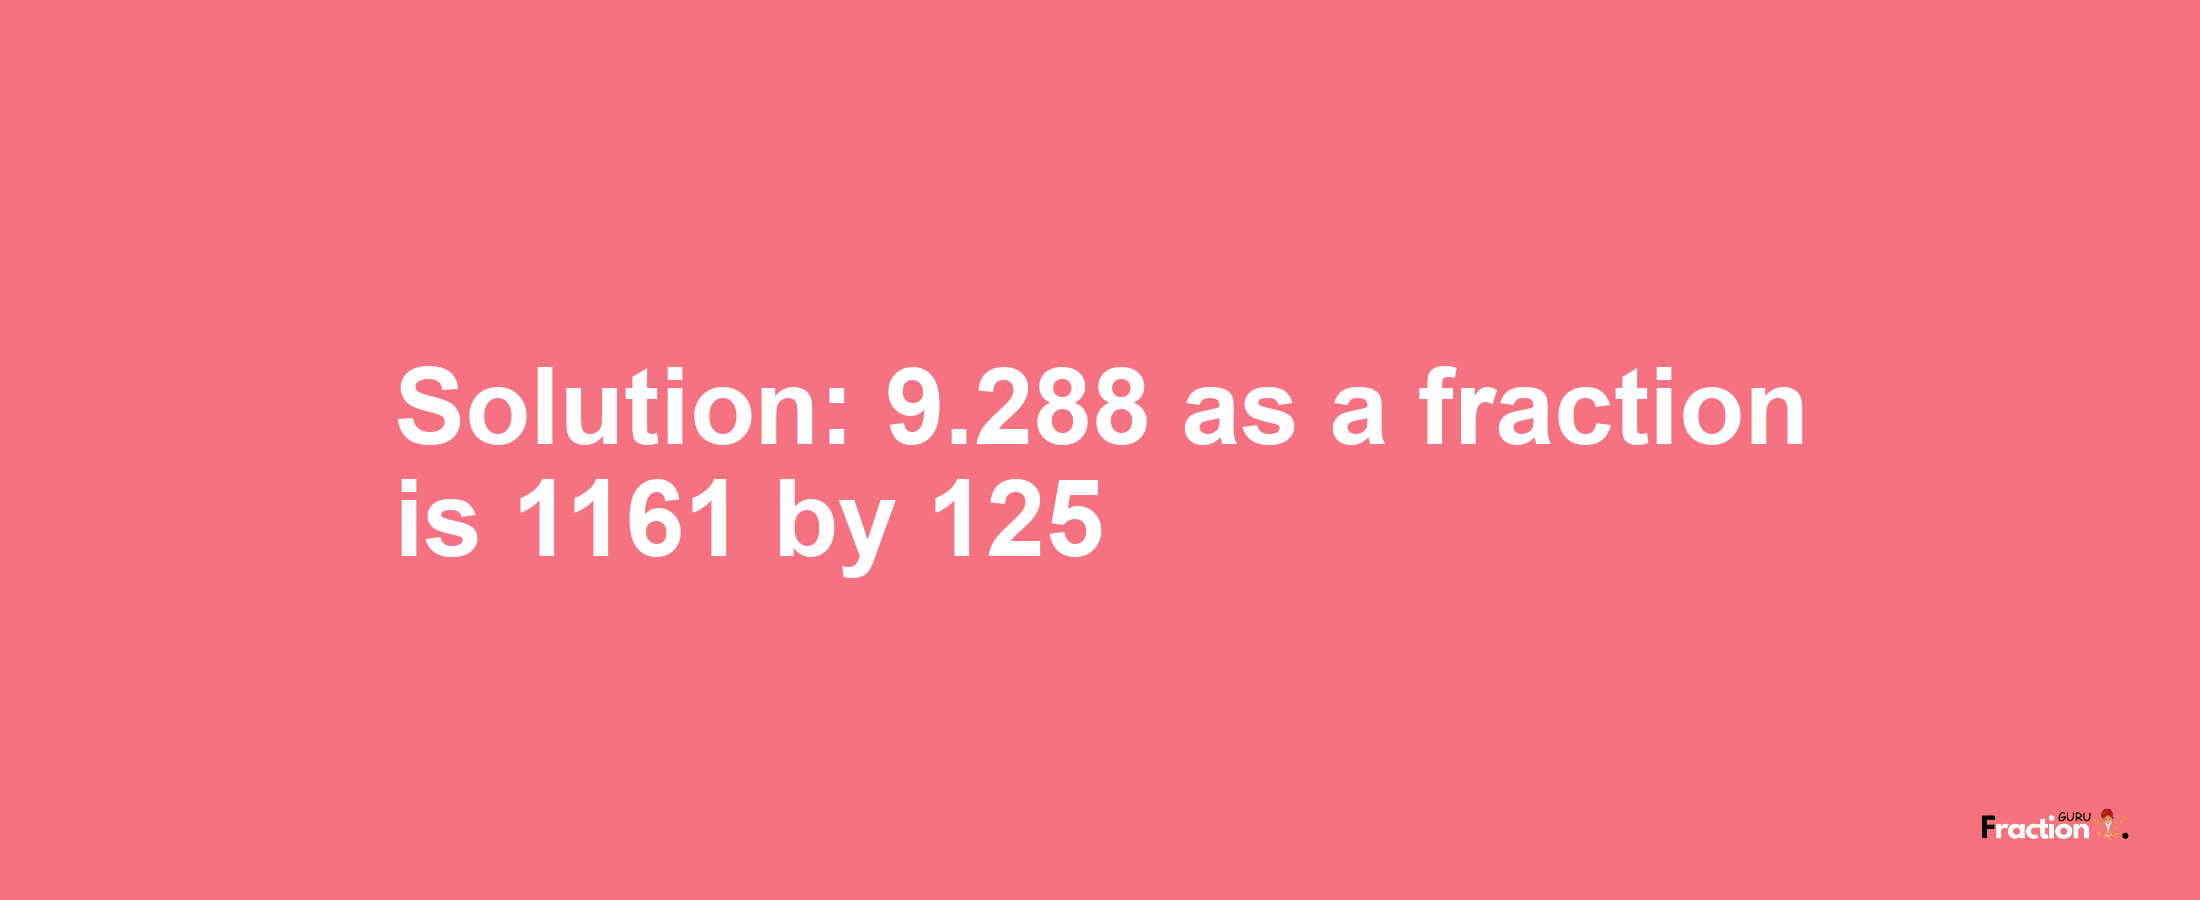 Solution:9.288 as a fraction is 1161/125